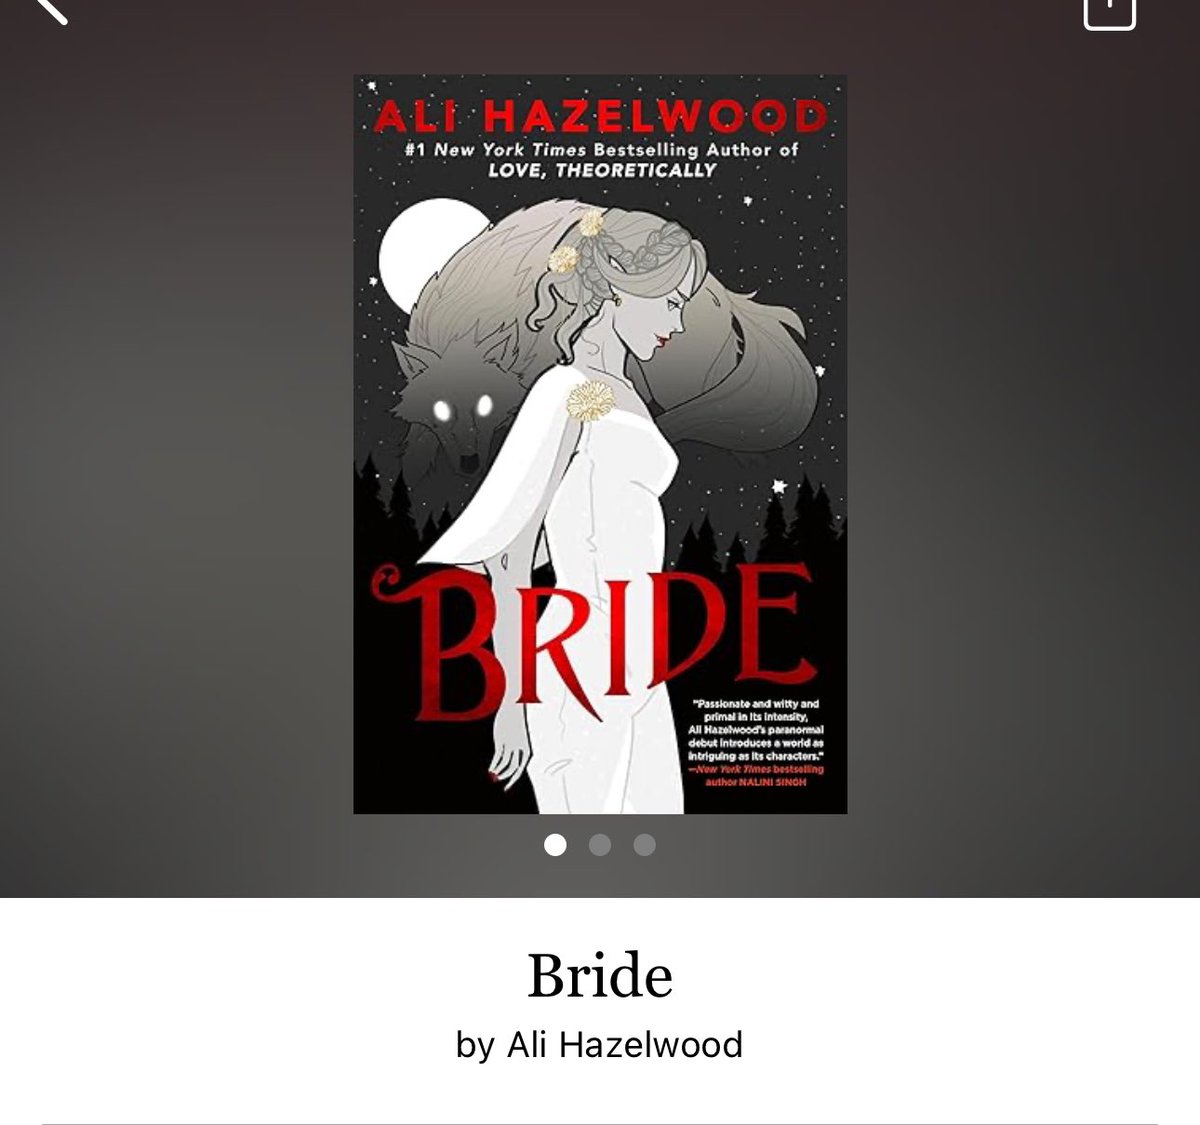 The Bride by Ali Hazelwood 

#TheBride by #AliHazelwood #6288 #30chapters #410pages #437of400 #NewRelease #Audiobook #74for19 #13houraudiobook #MiseryAndLore #april2024 #clearingoffreadingshelves #whatsnext #readitquick